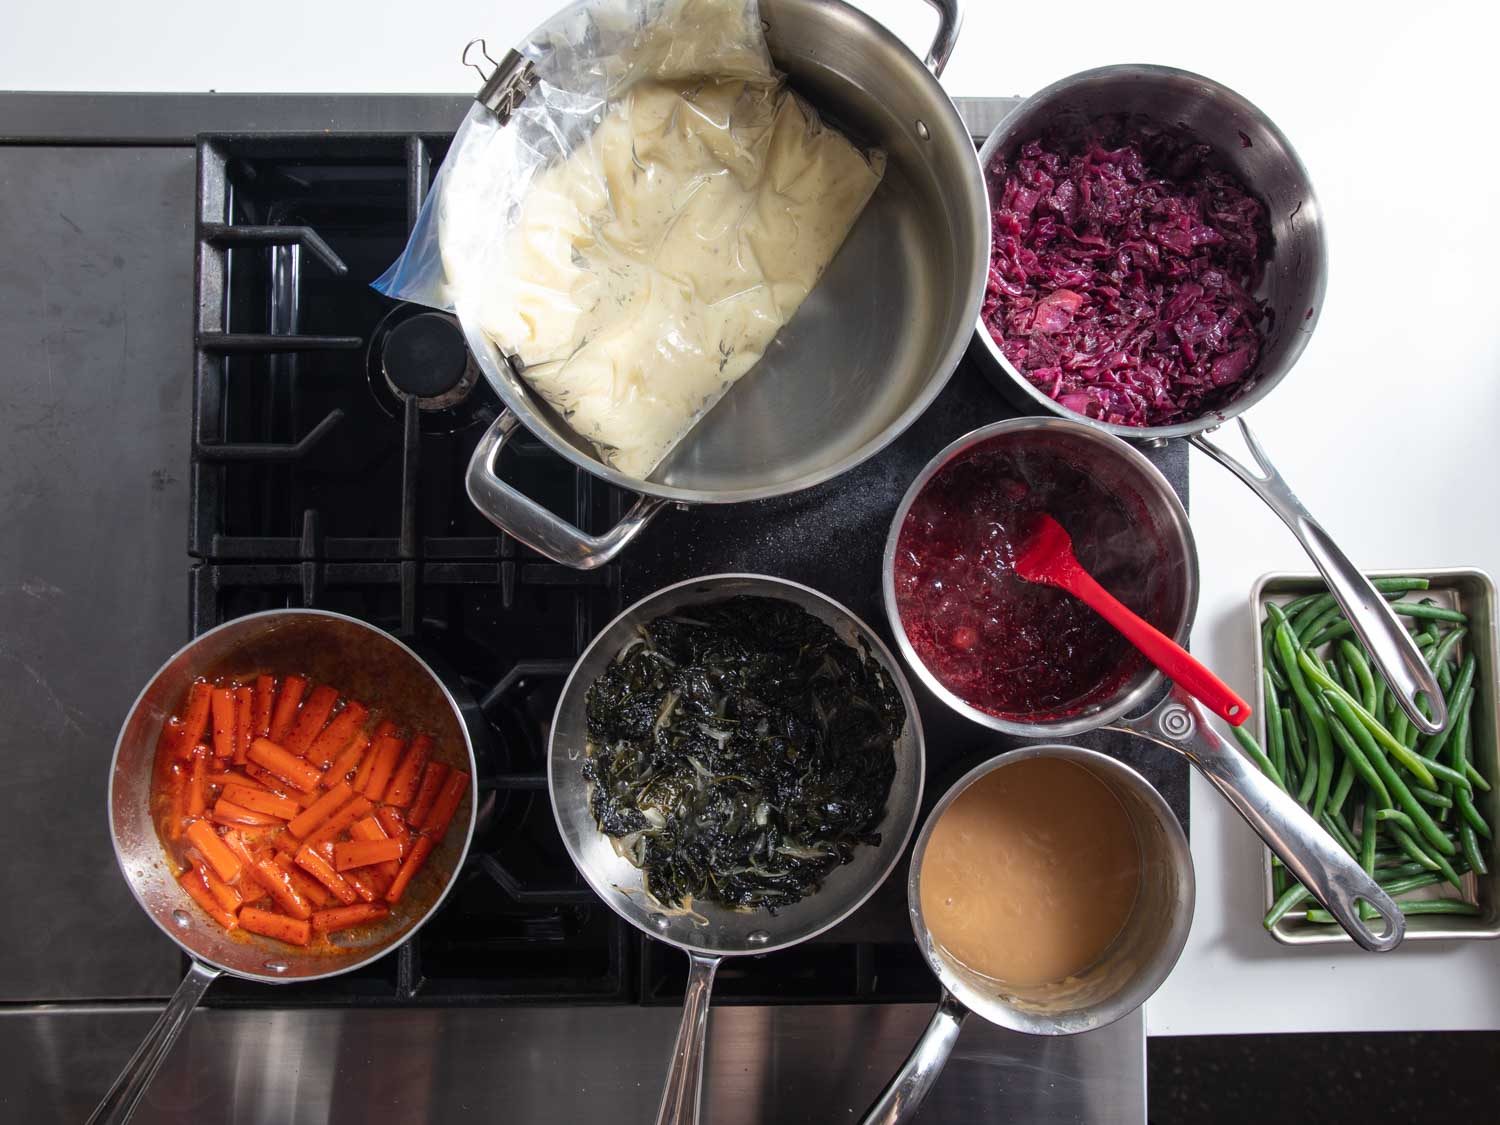 Overhead of a range with Baking Steel set up as a warming station with pots and saucepans of mashed potatoes, gravy, cranberry sauce, braised kale, red cabbage, and glazed carrots.